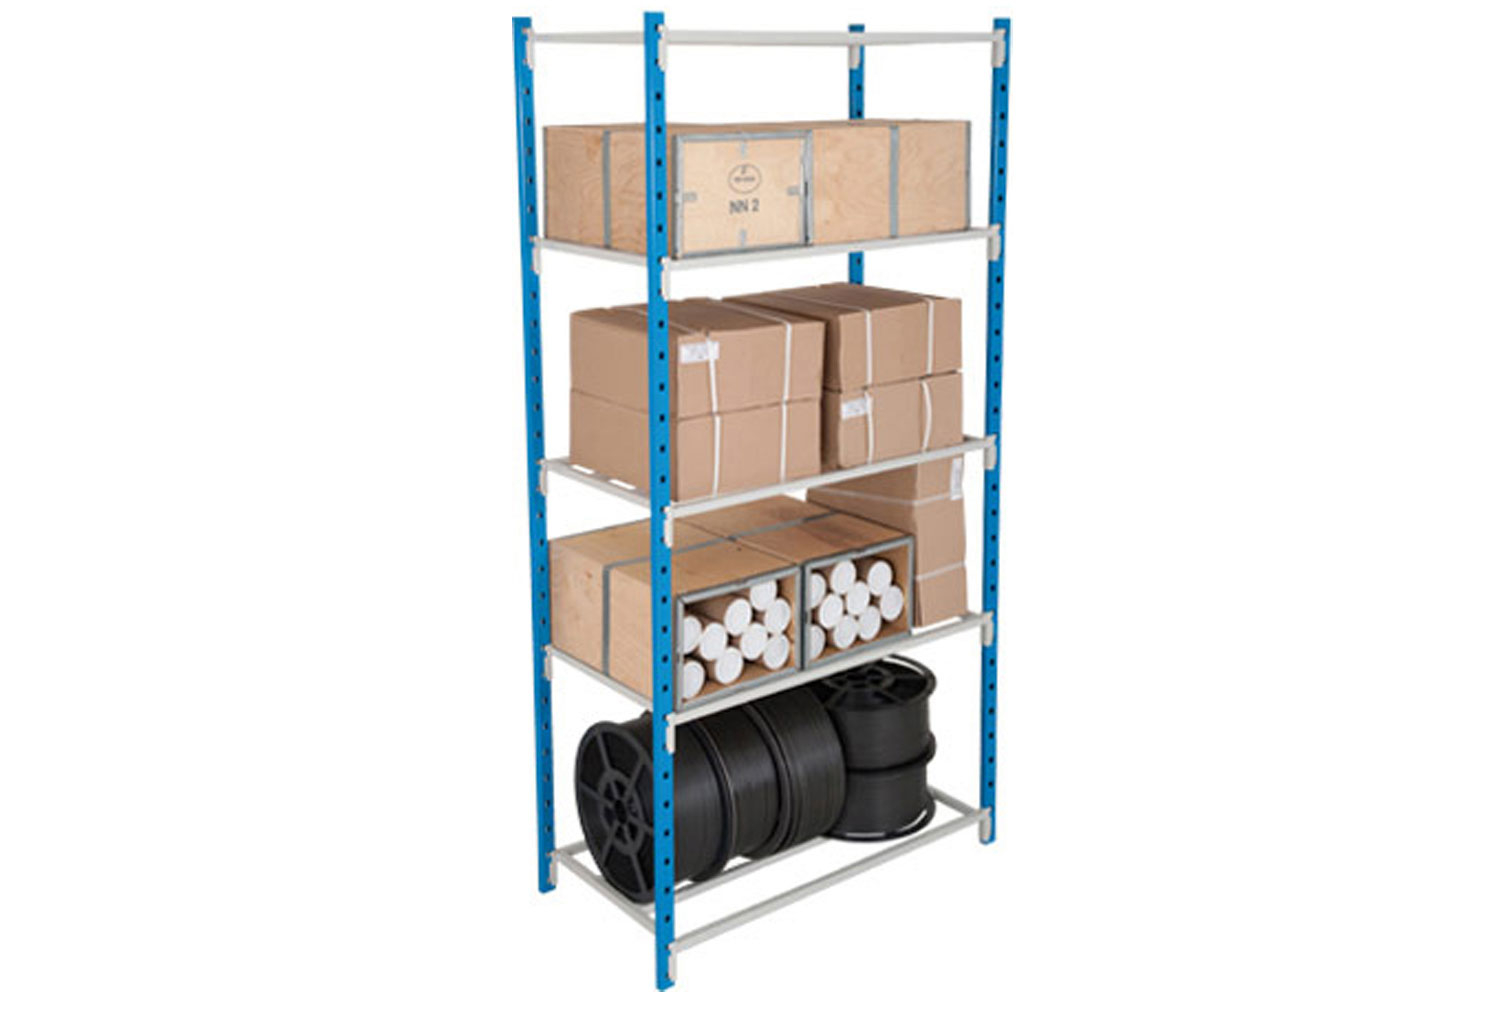 Tubular Shelving Bay With 5 Tubular Steel Shelves, 1000wx500dx2000h (mm), Blue, Express Delivery